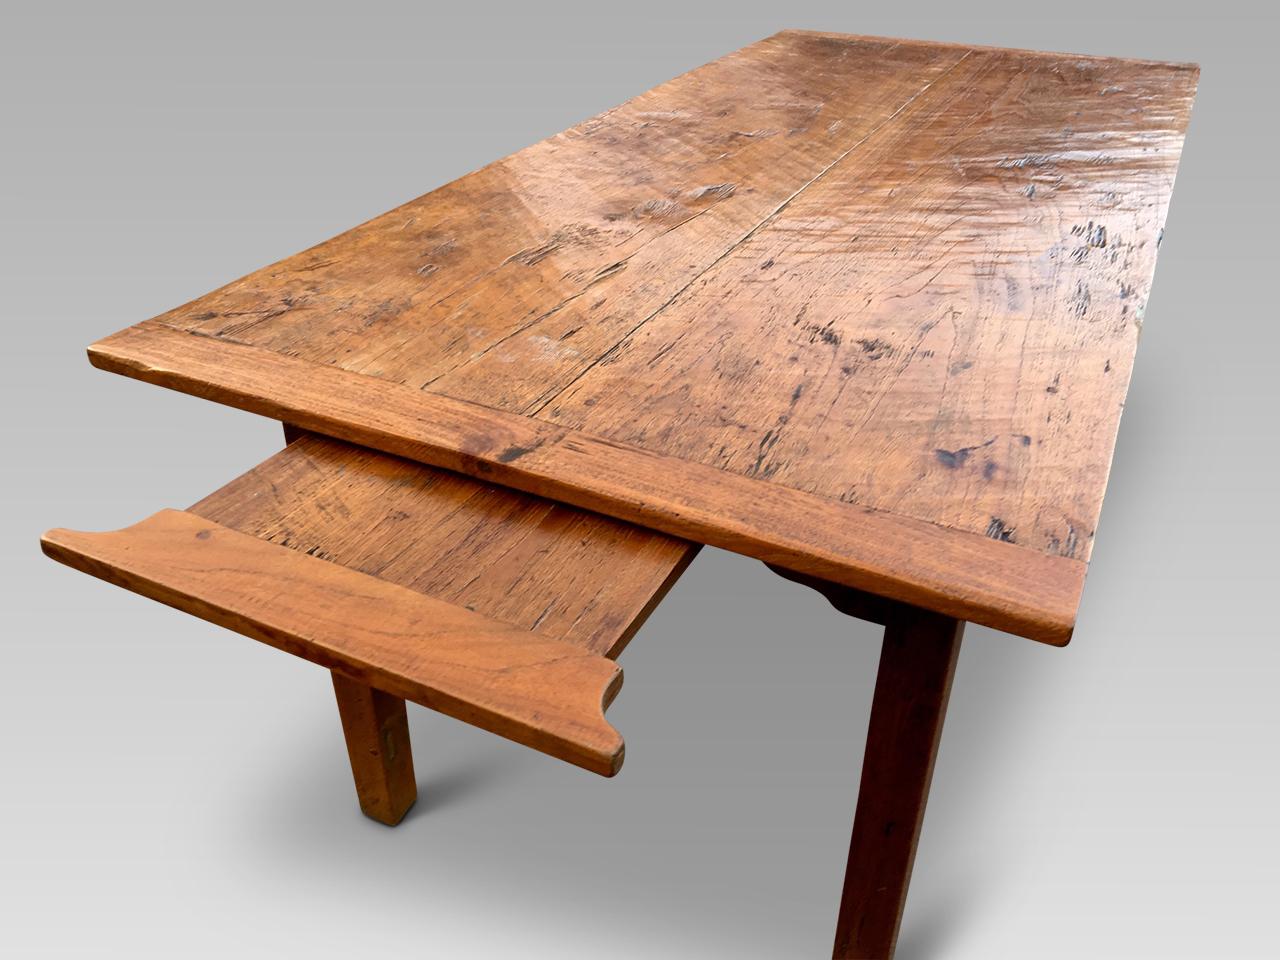 Good quality family farmhouse dining table to seat 8 people comfortably.

This delightful table is firm in joint and has a flat and level top with a well figured grain.

 We have cleaned and waxed this table which retains a warm and mellow patina.